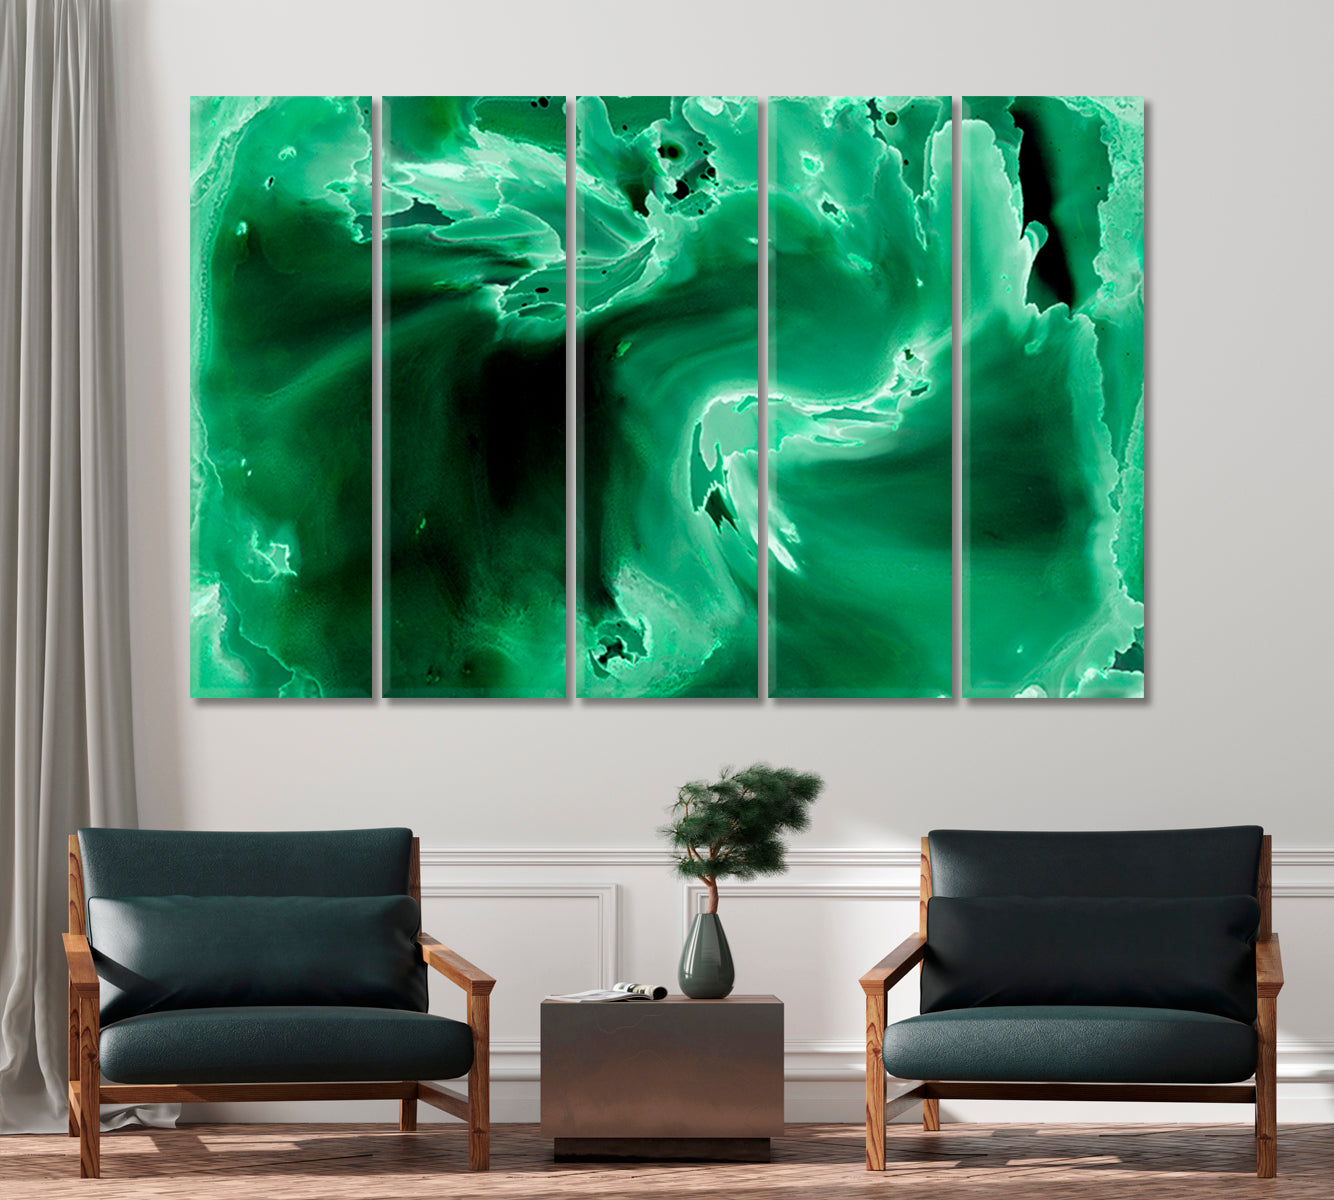 Abstract Waves of Green Marble Canvas Print-Canvas Print-CetArt-5 Panels-36x24 inches-CetArt